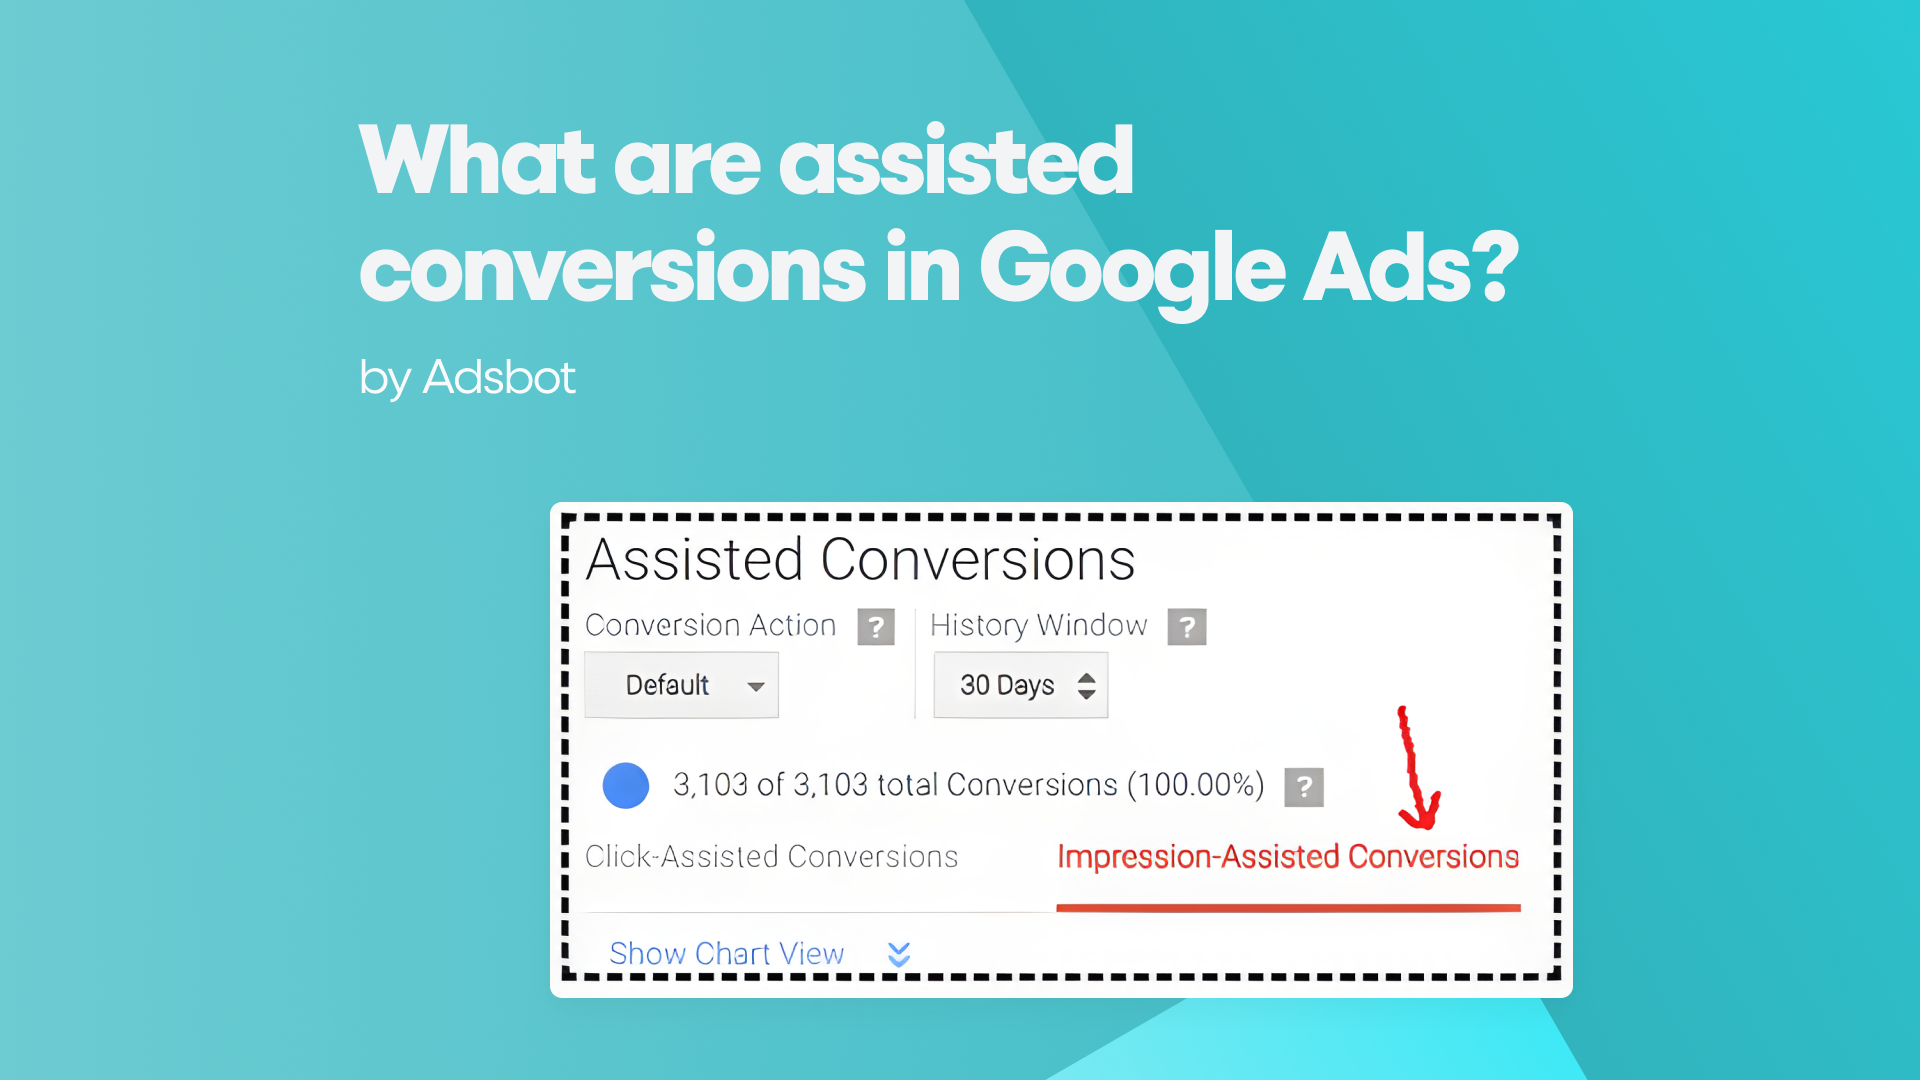 What are Assisted Conversions in Google Ads?